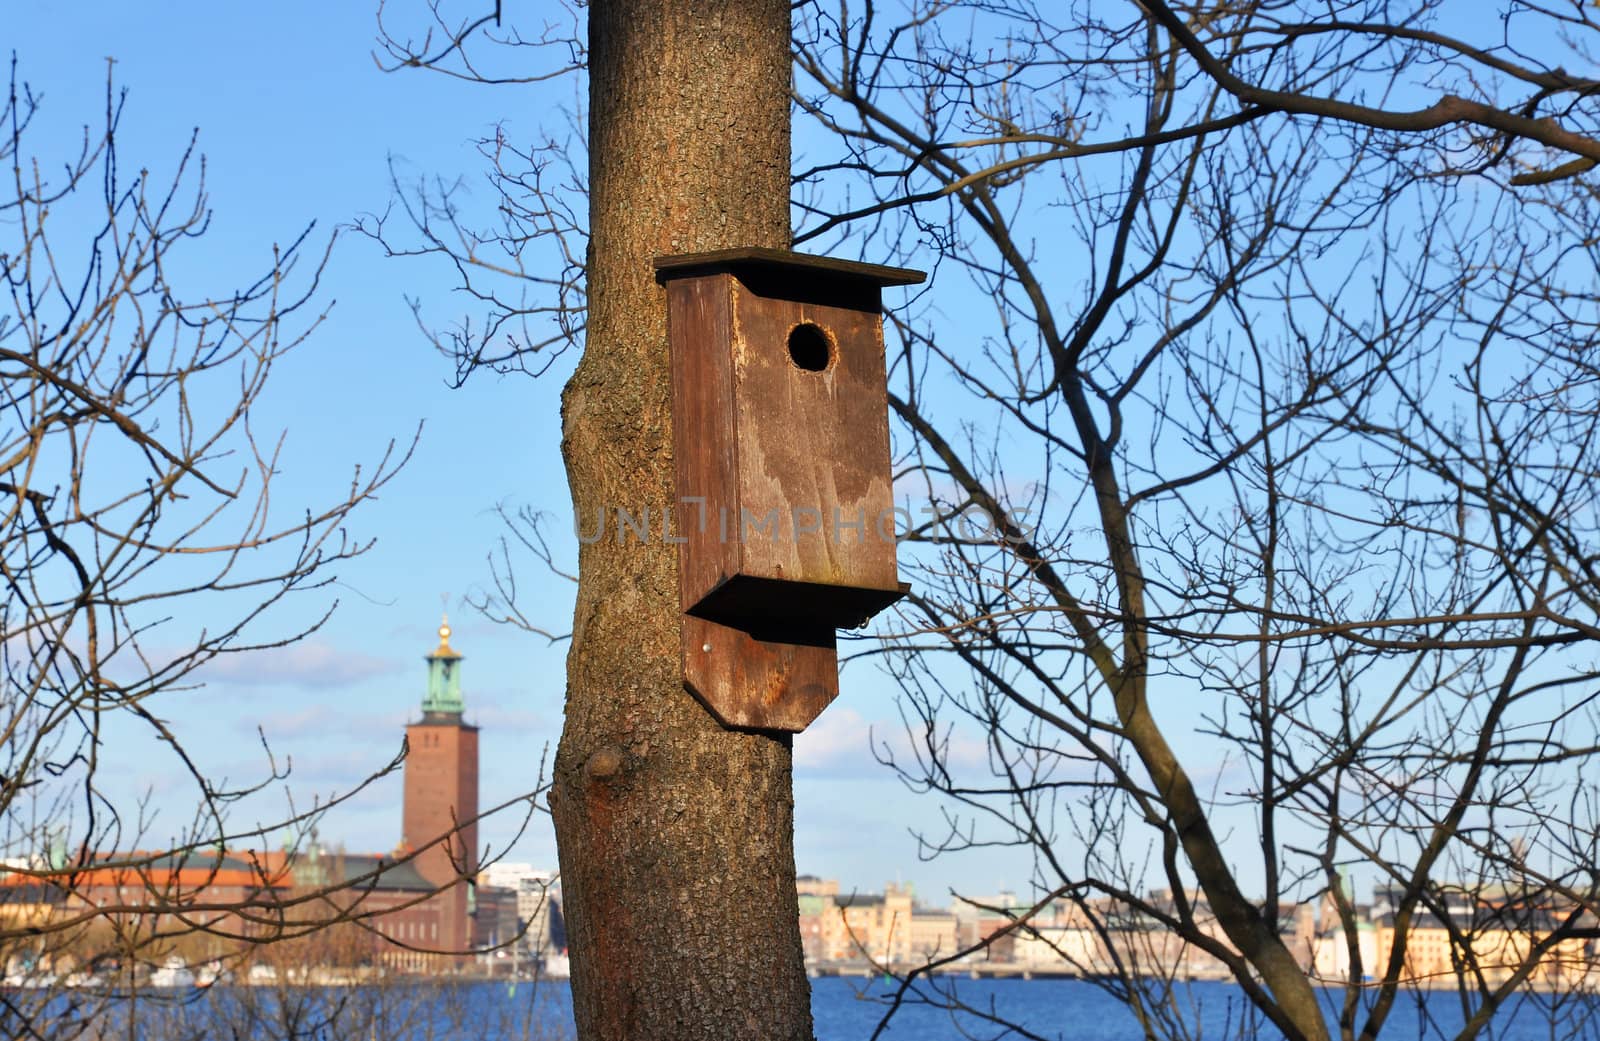 Wooden nesting box in a tree with Stockholm city hall in the background.